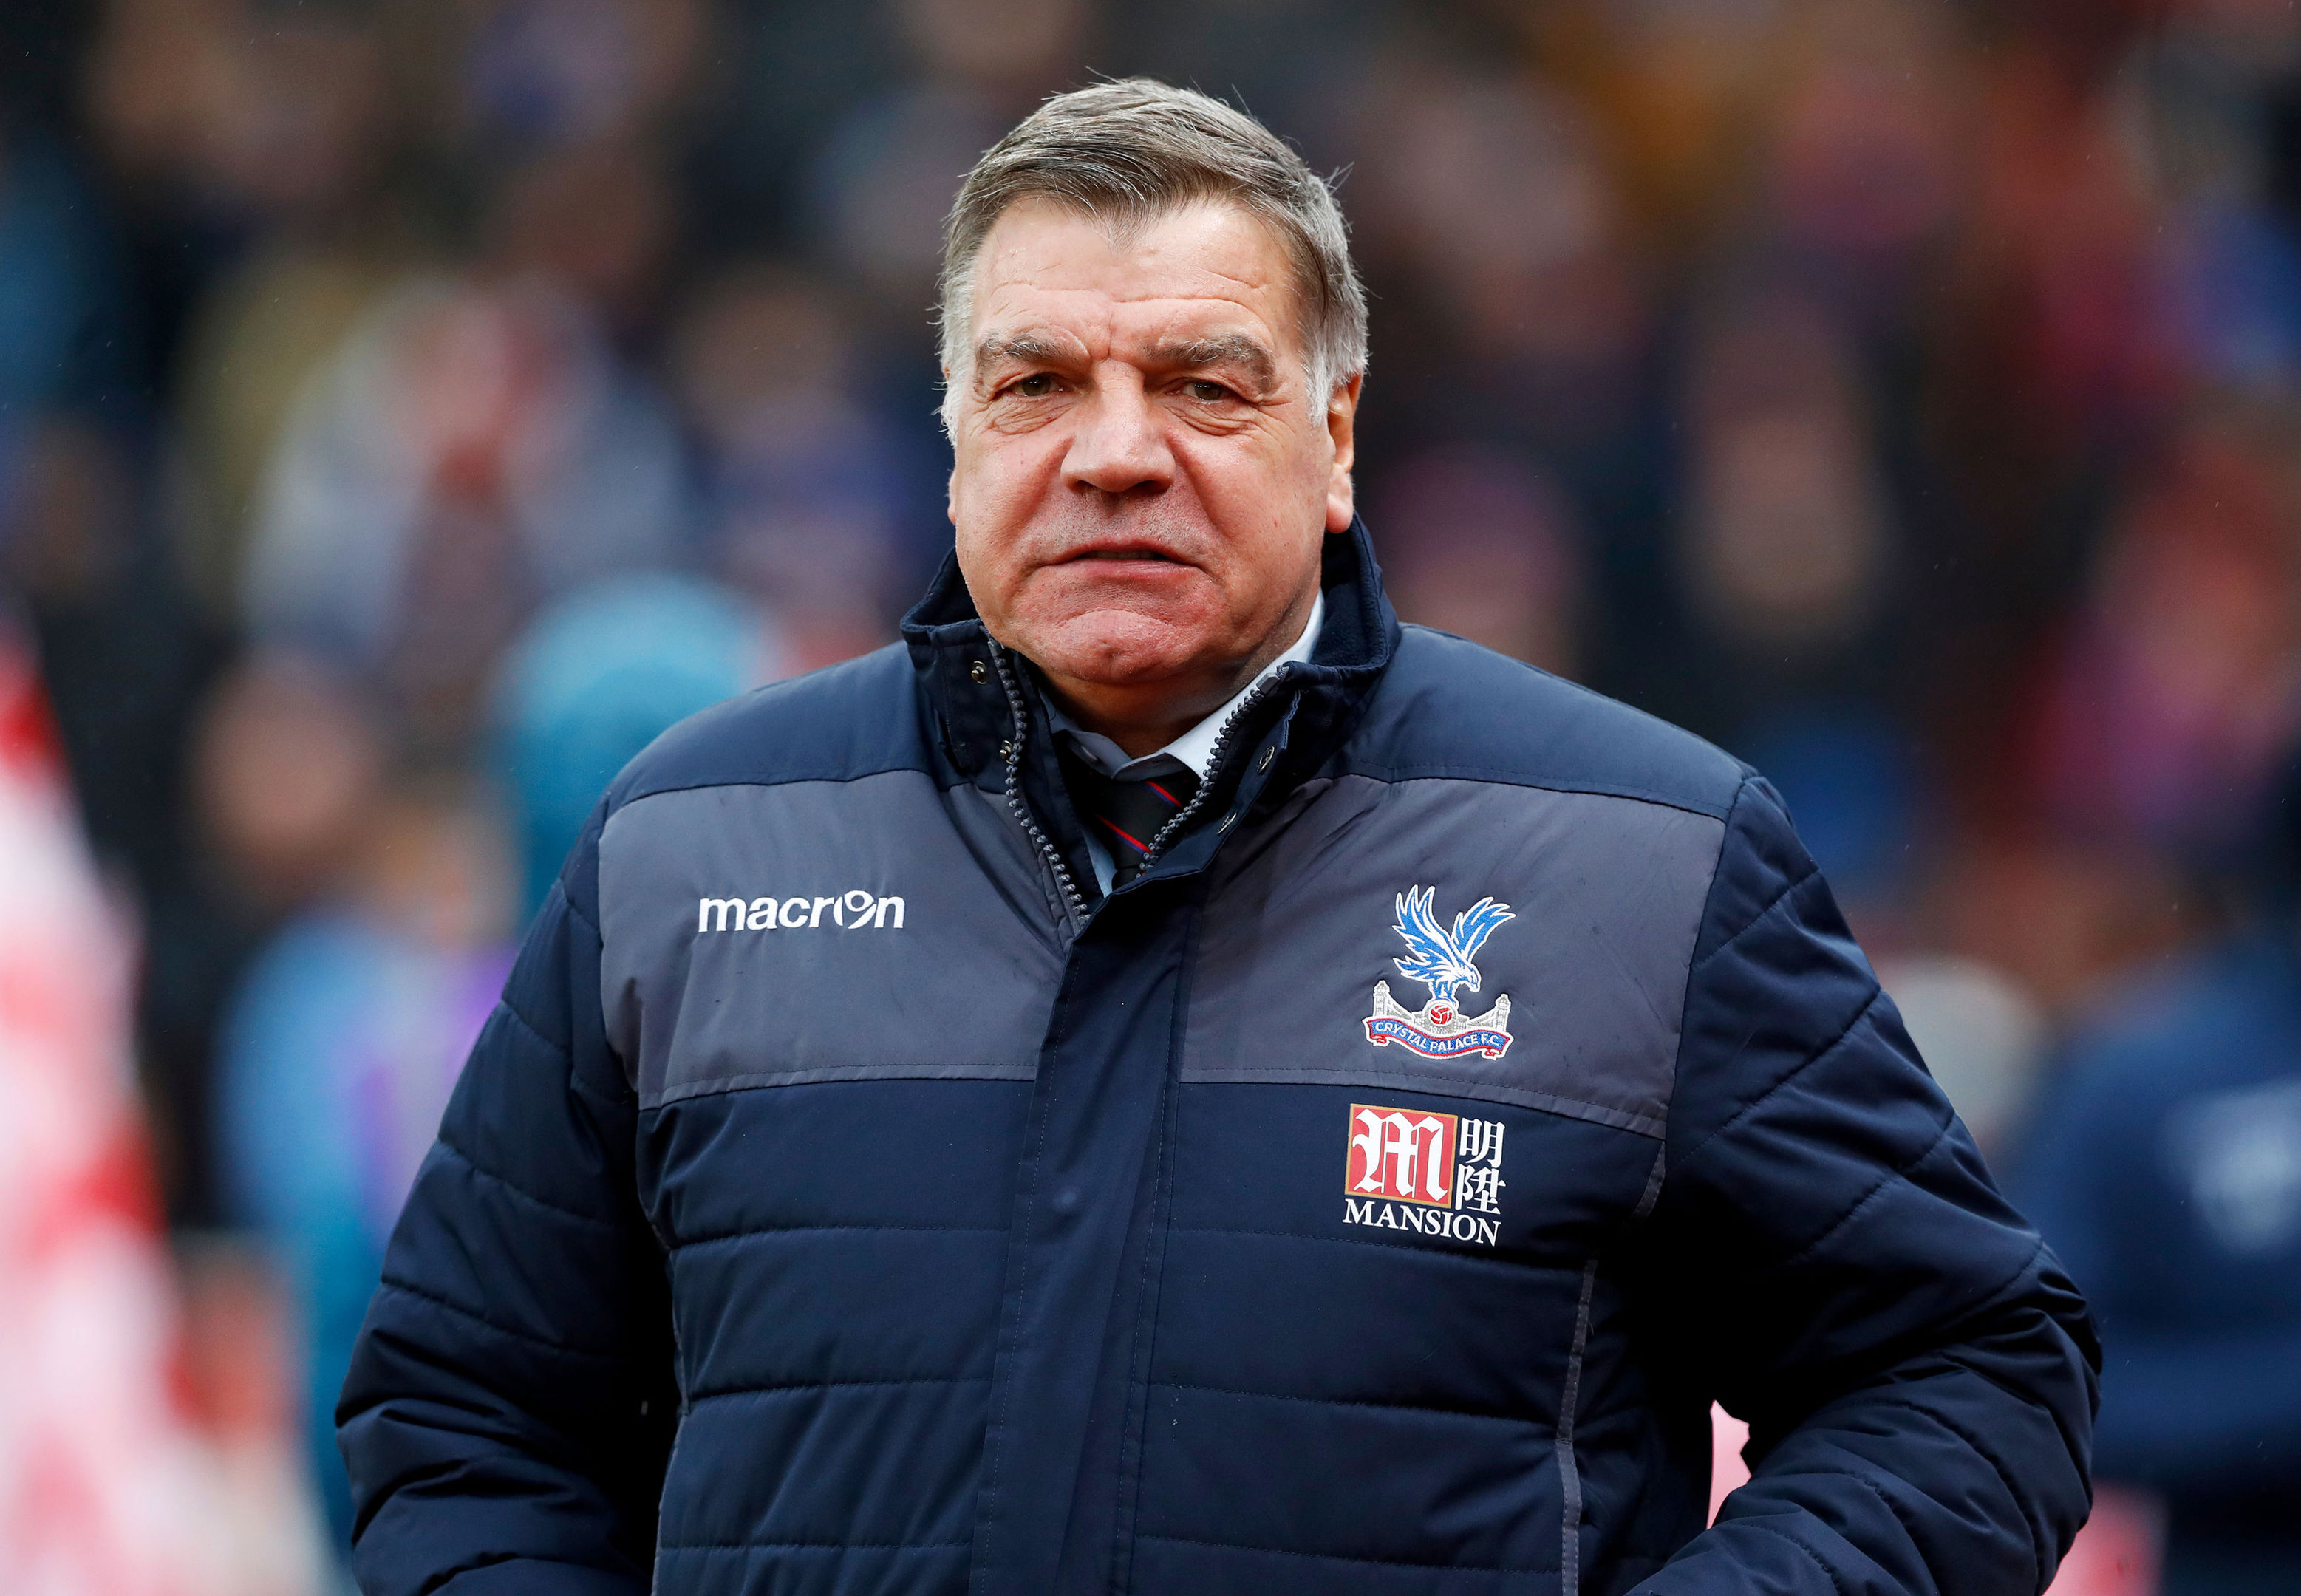 Everton have finally completed their search for a new manager with the appointment of Sam Allardyce, according to reports (Martin Rickett/PA Wire)